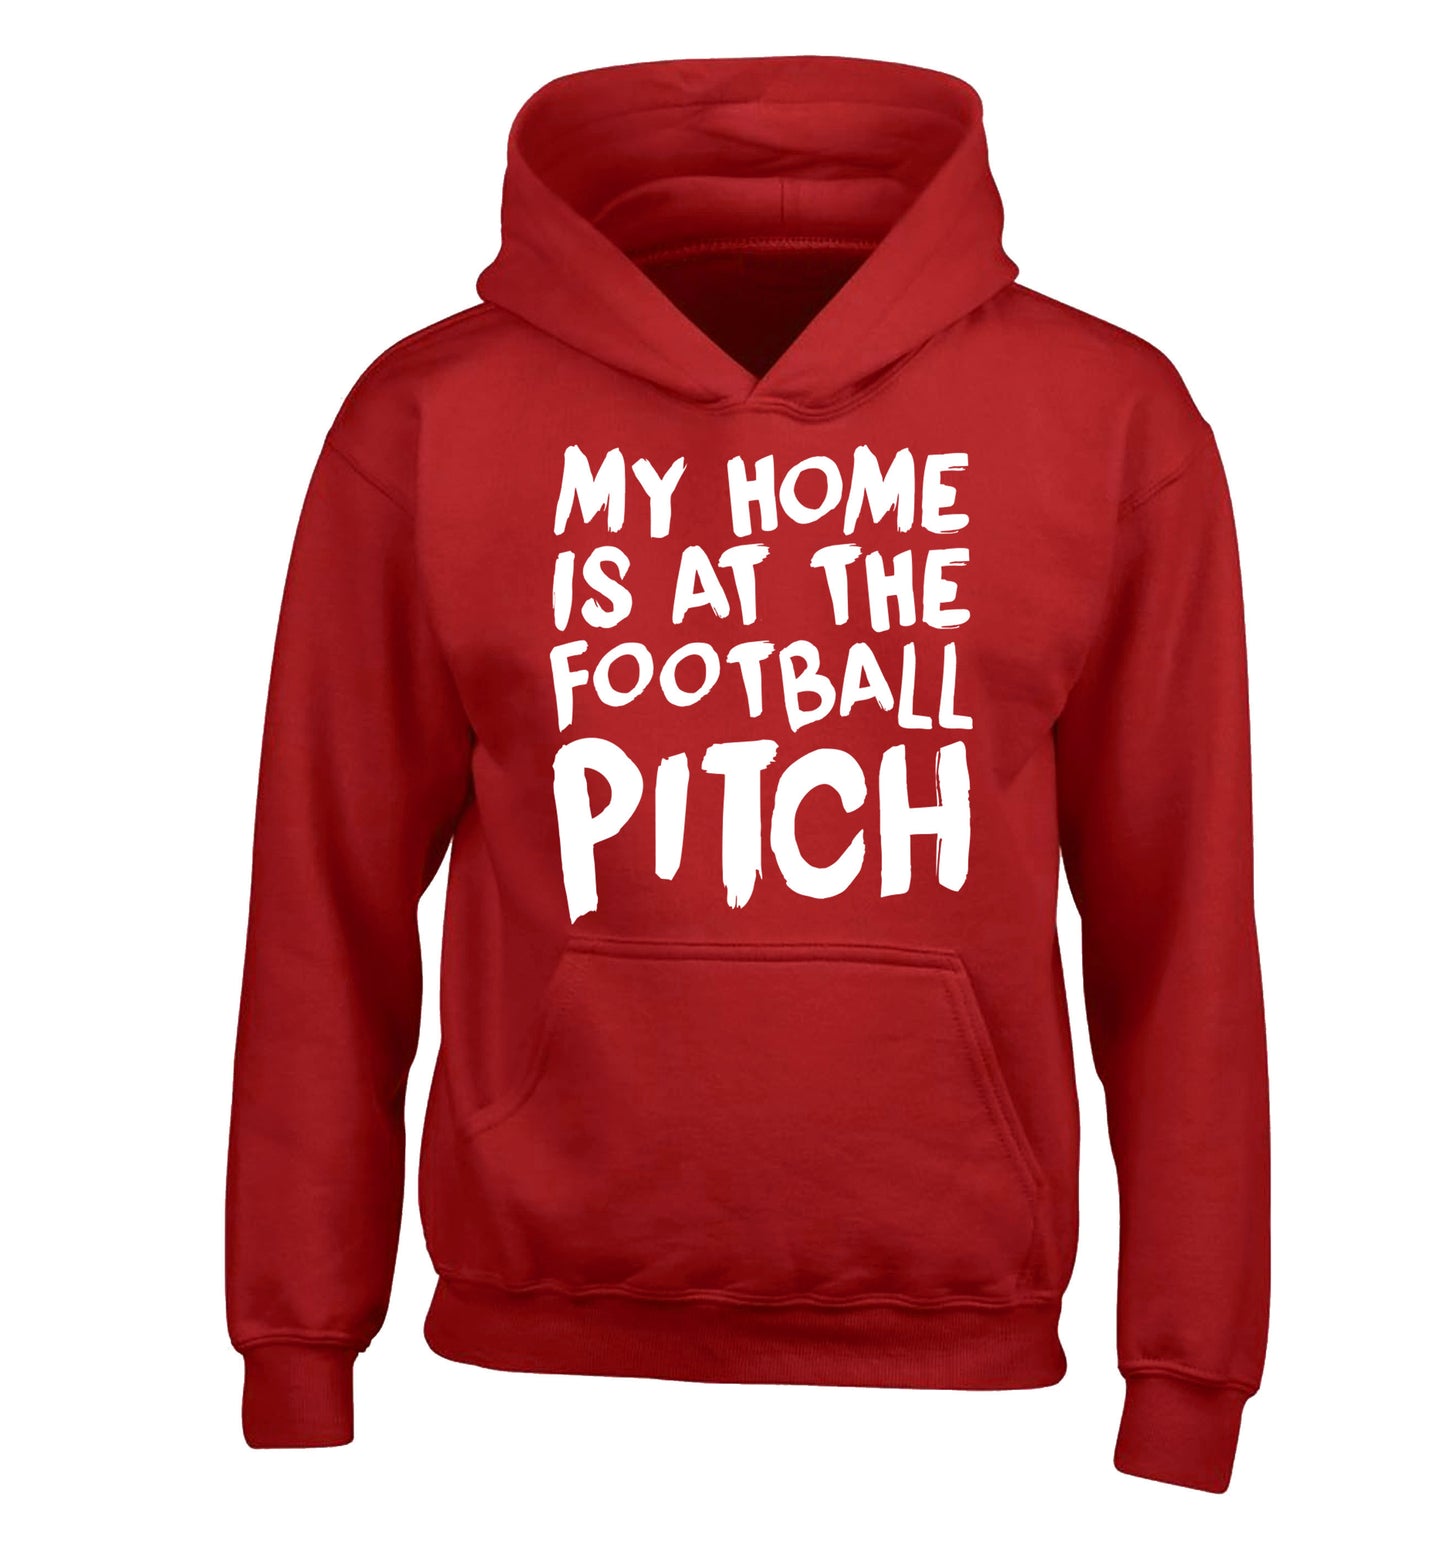 My home is at the football pitch children's red hoodie 12-14 Years